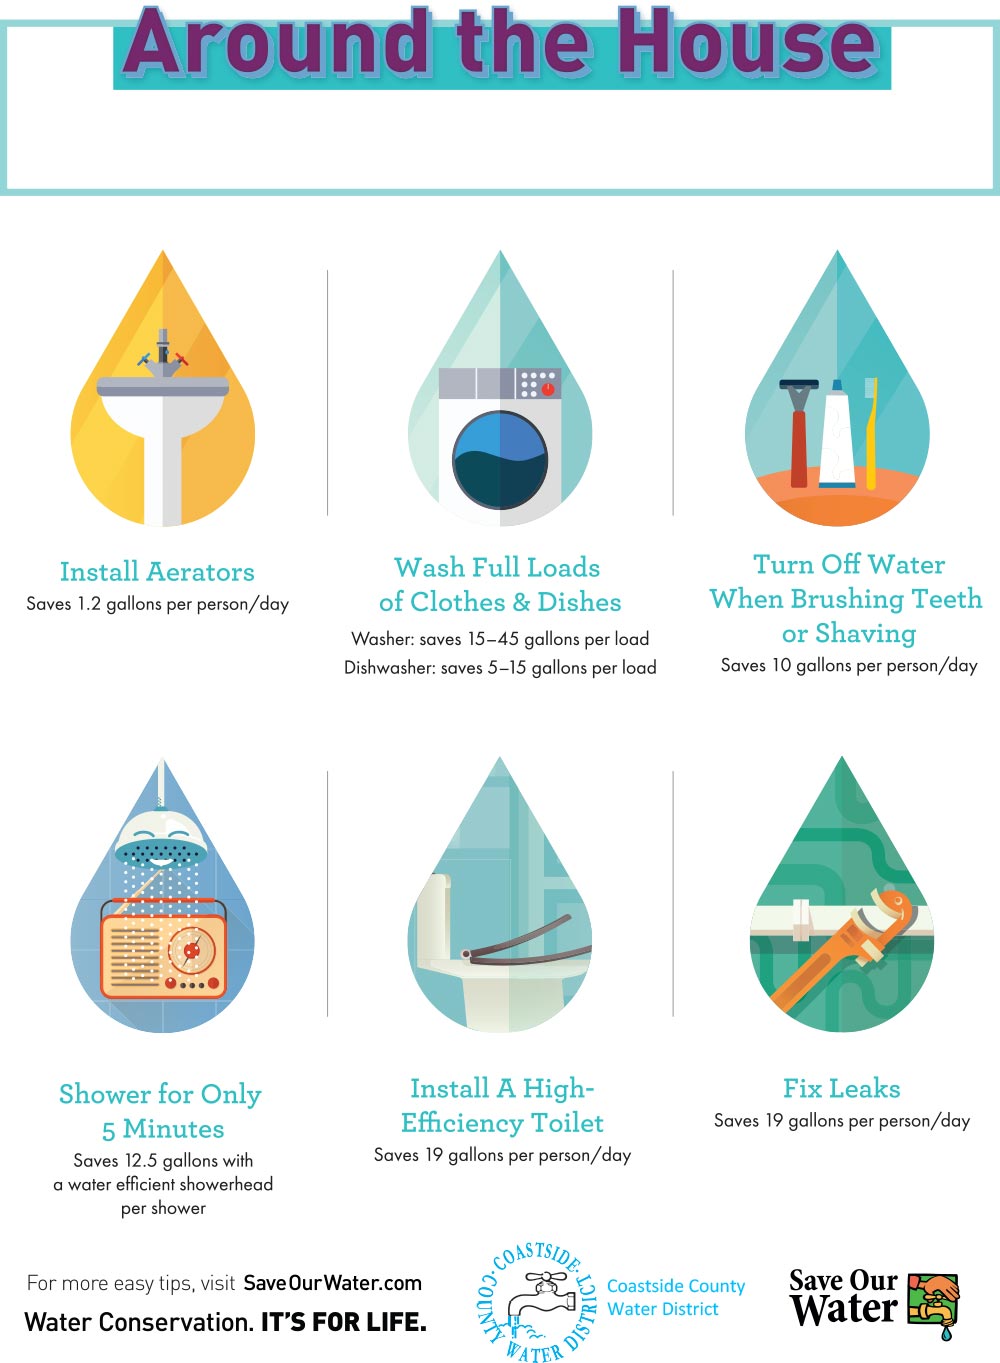 Around the House water conservation tips